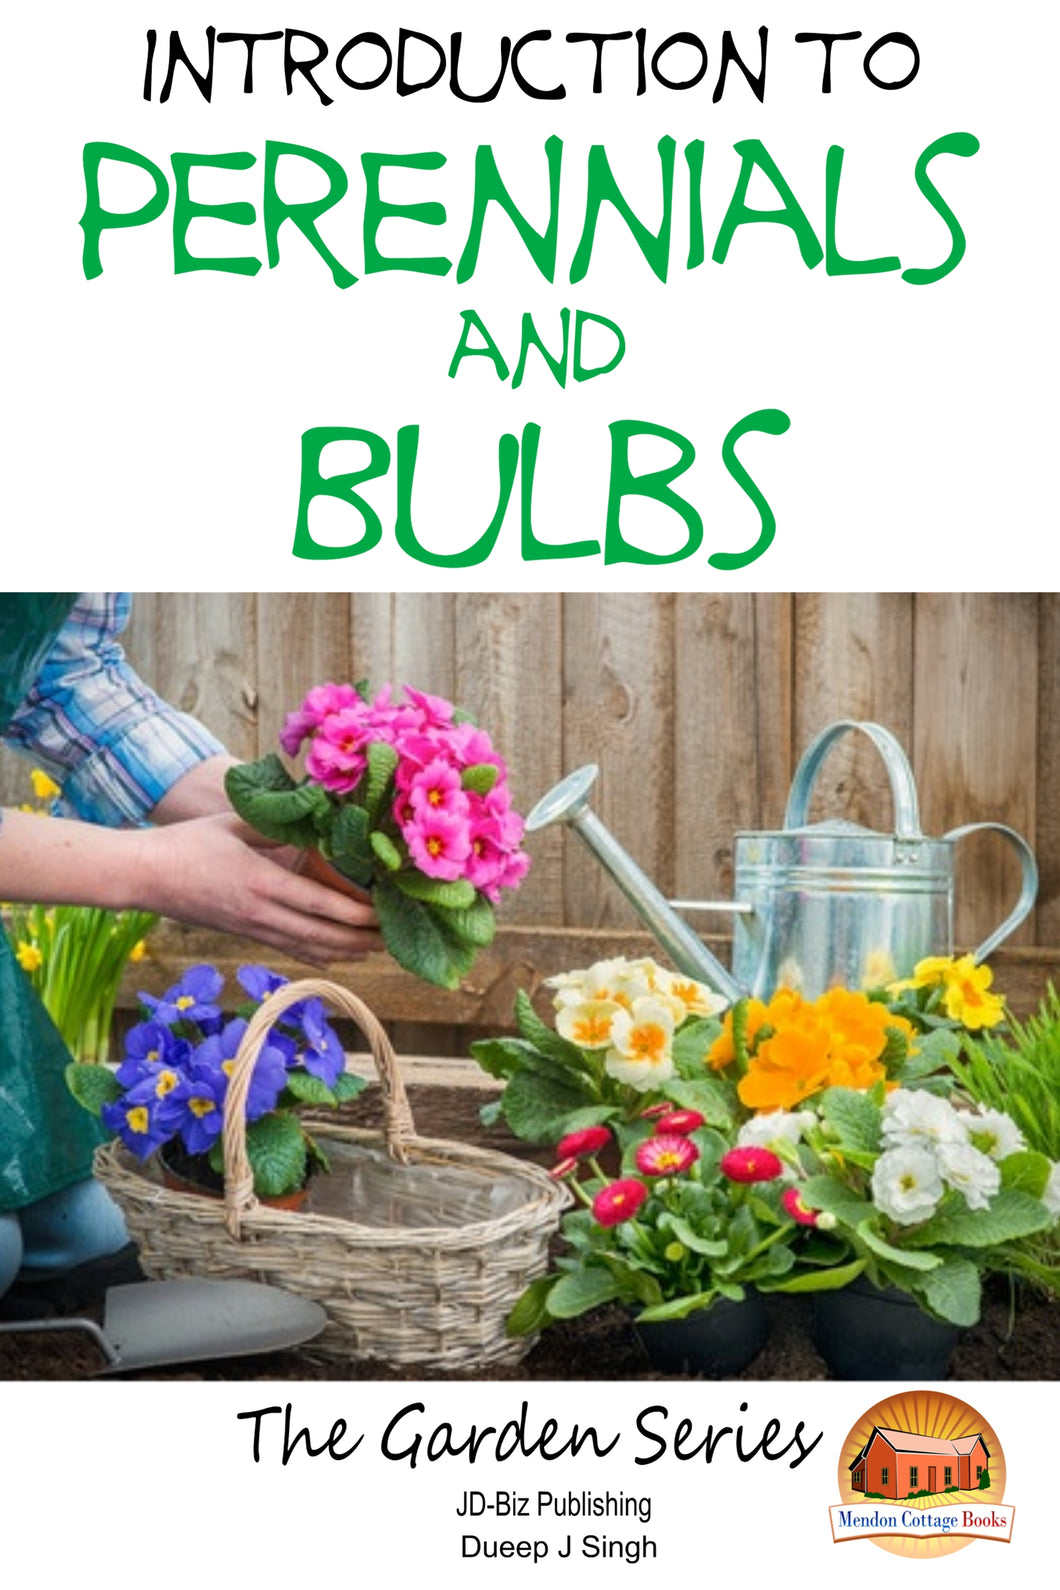 Introduction to Perennials and Bulbs